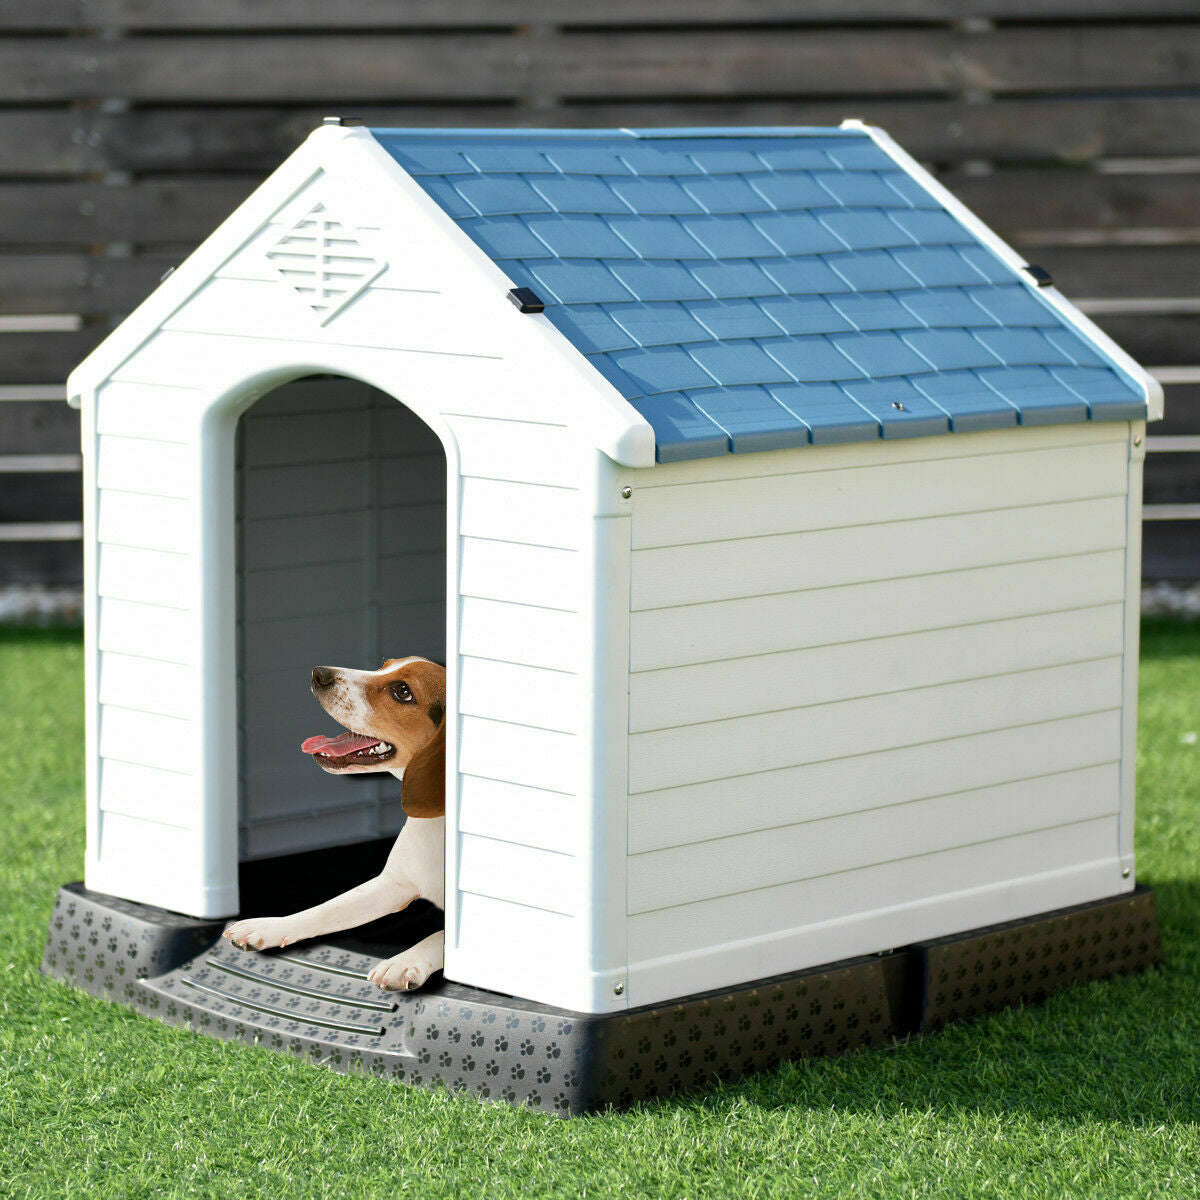 Gymax Blue Plastic Dog House Pet Puppy Shelter Waterproof Indoor/Outdoor Ventilate